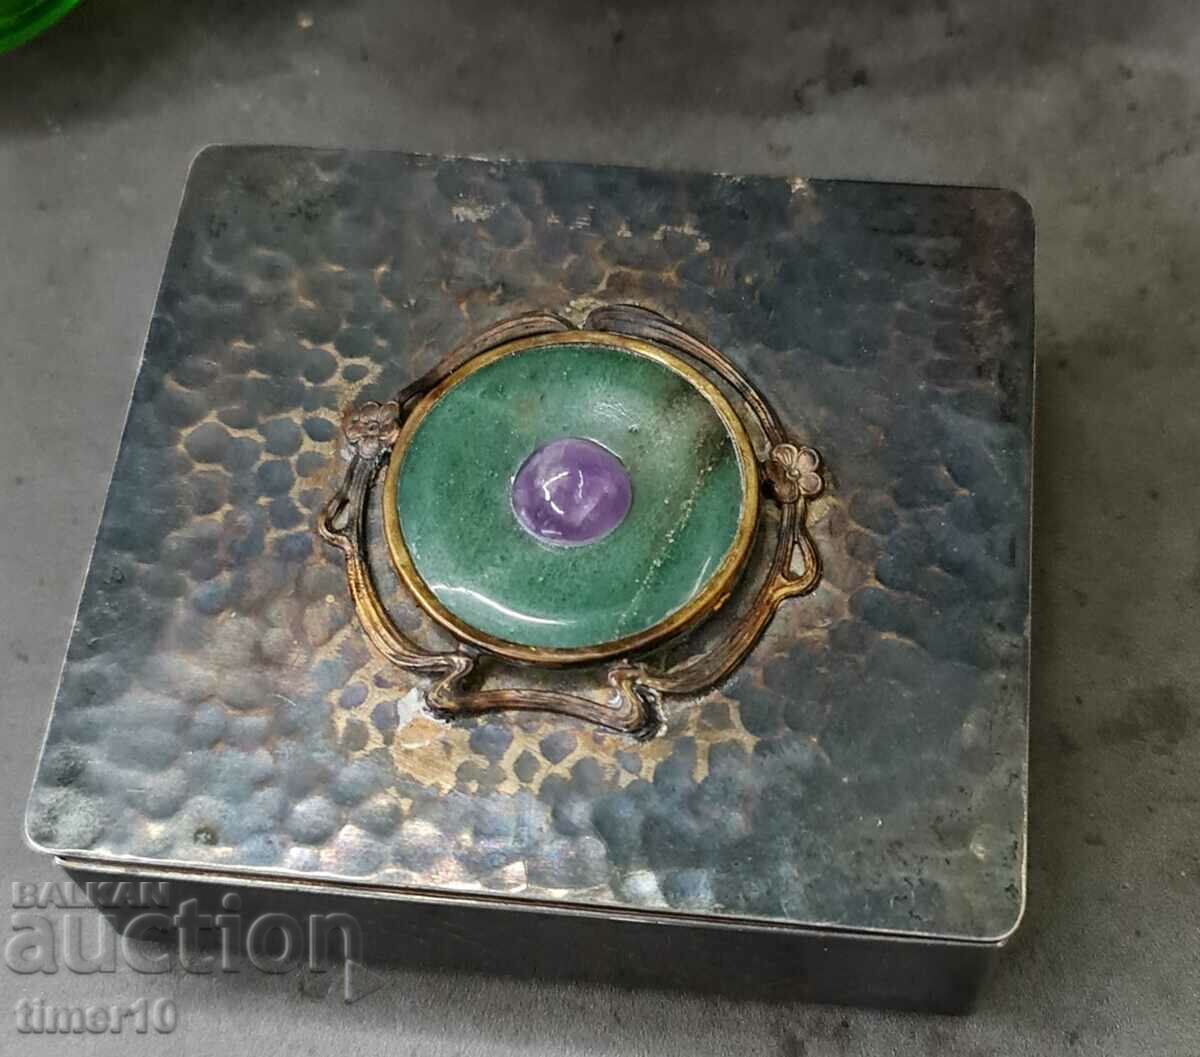 WMF silver plated jade and amethyst jewelry box